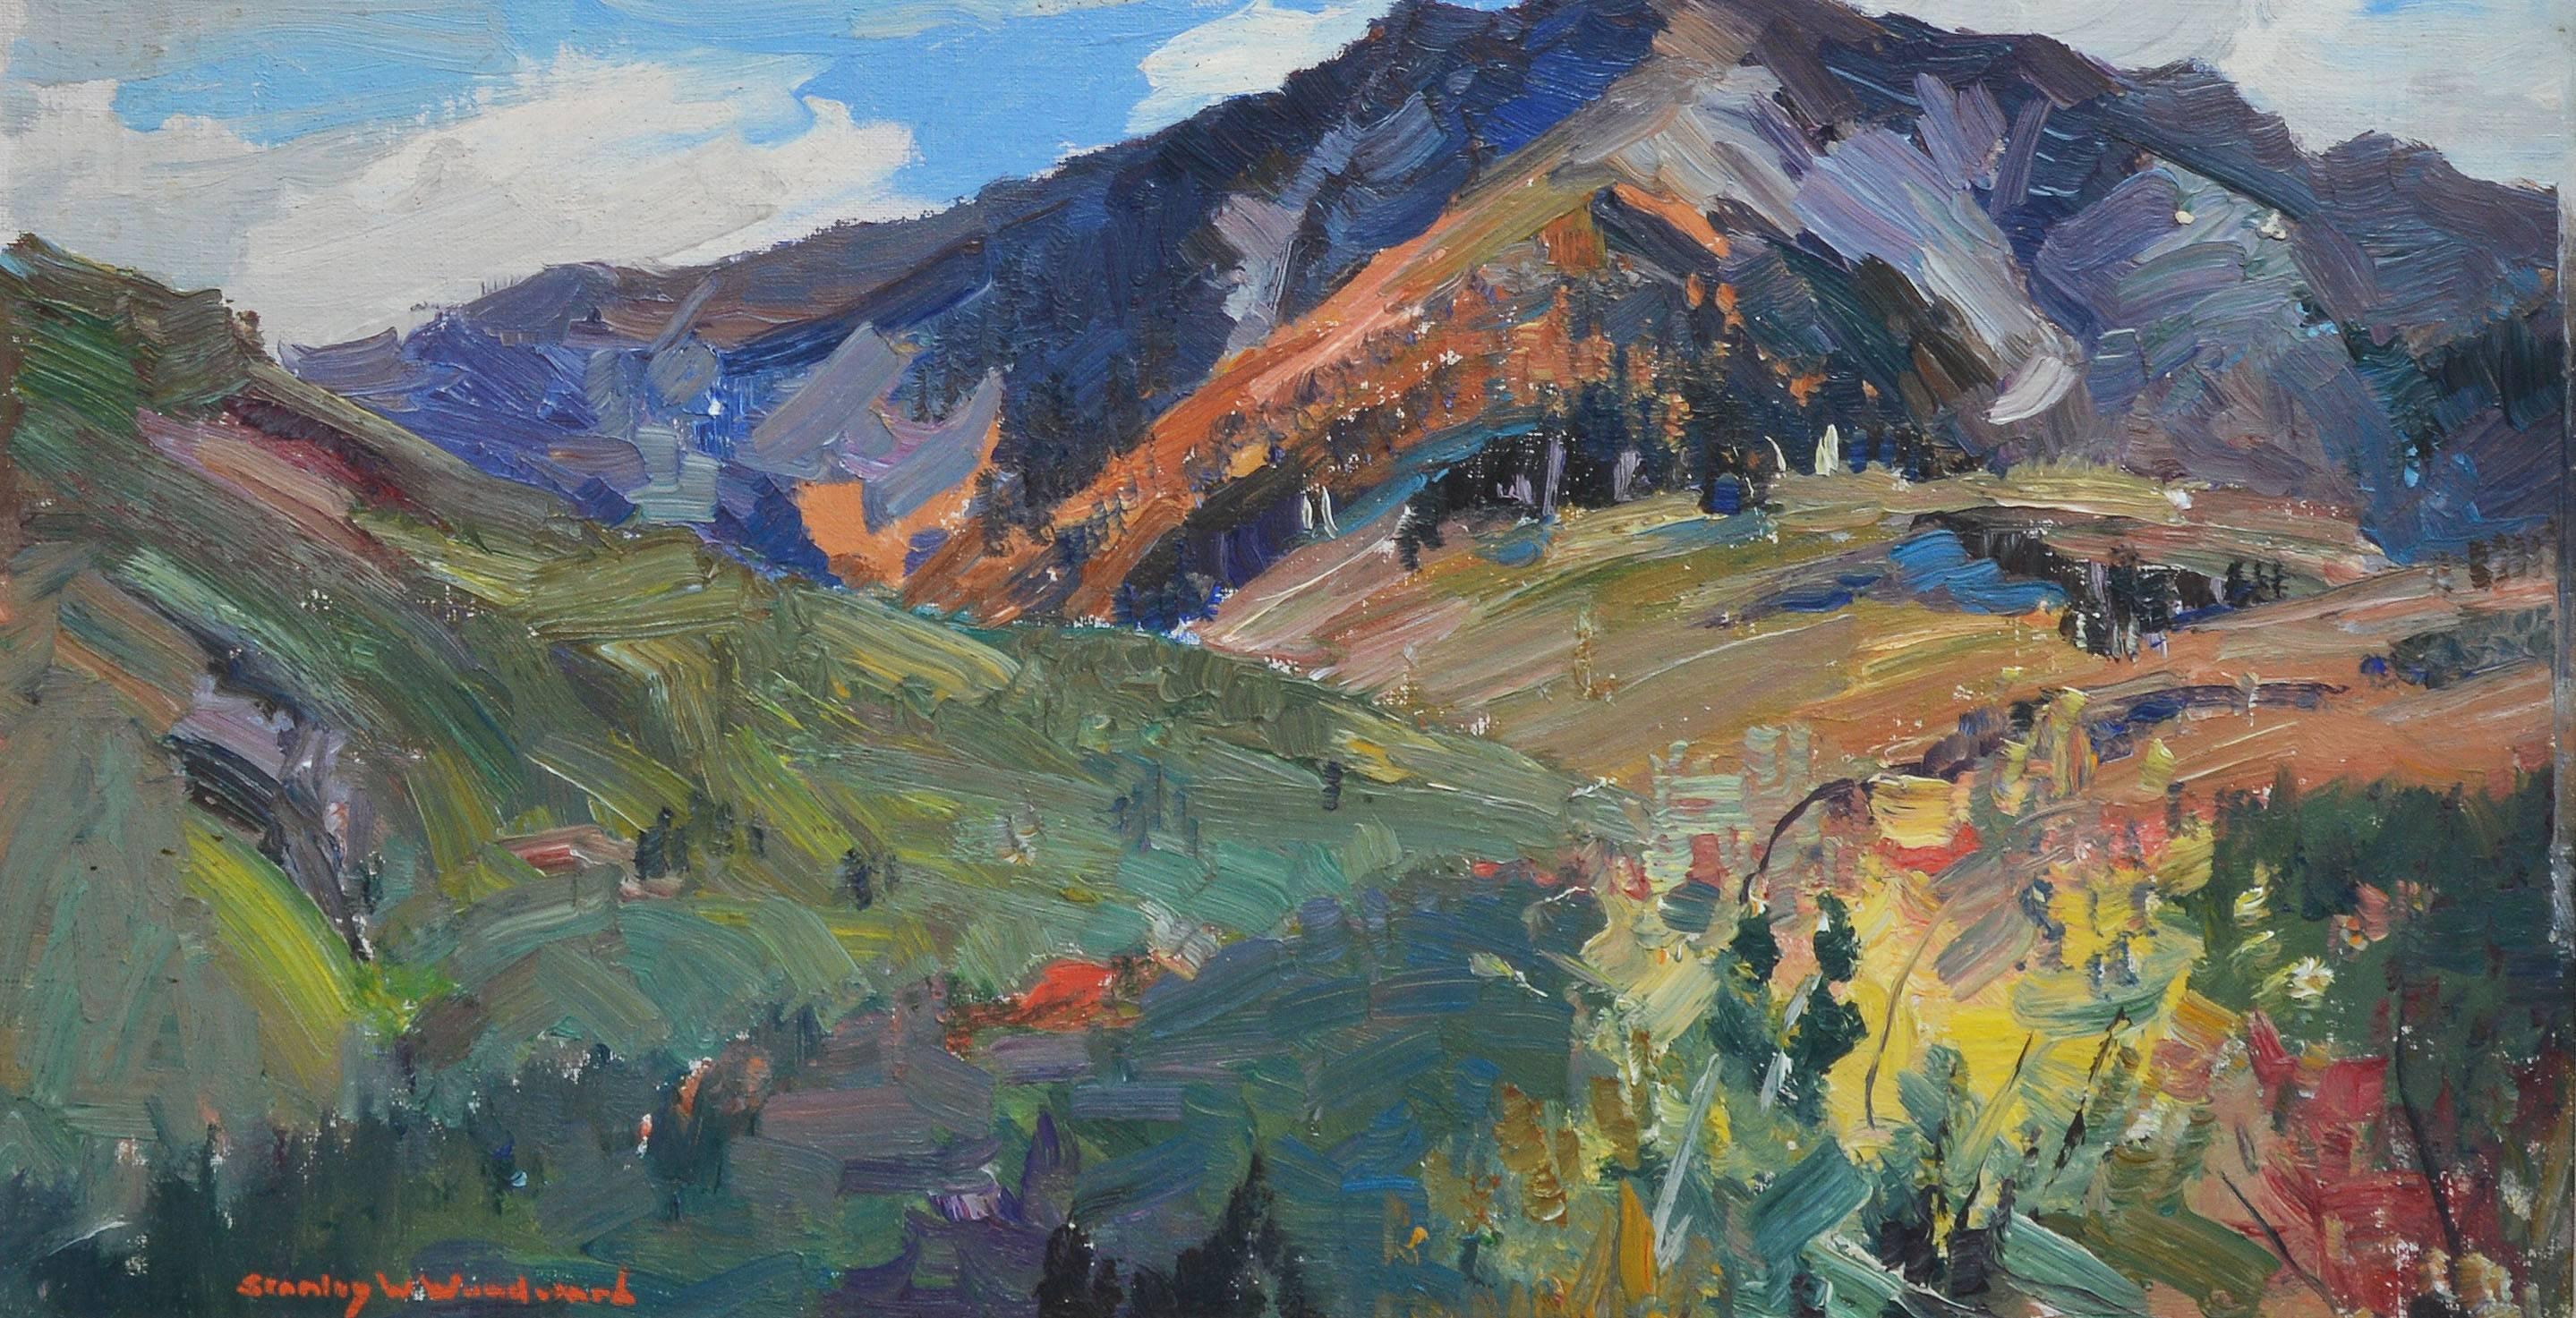 The Mountainside by Stanley Woodward - Gray Landscape Painting by Stanley Wingate Woodward